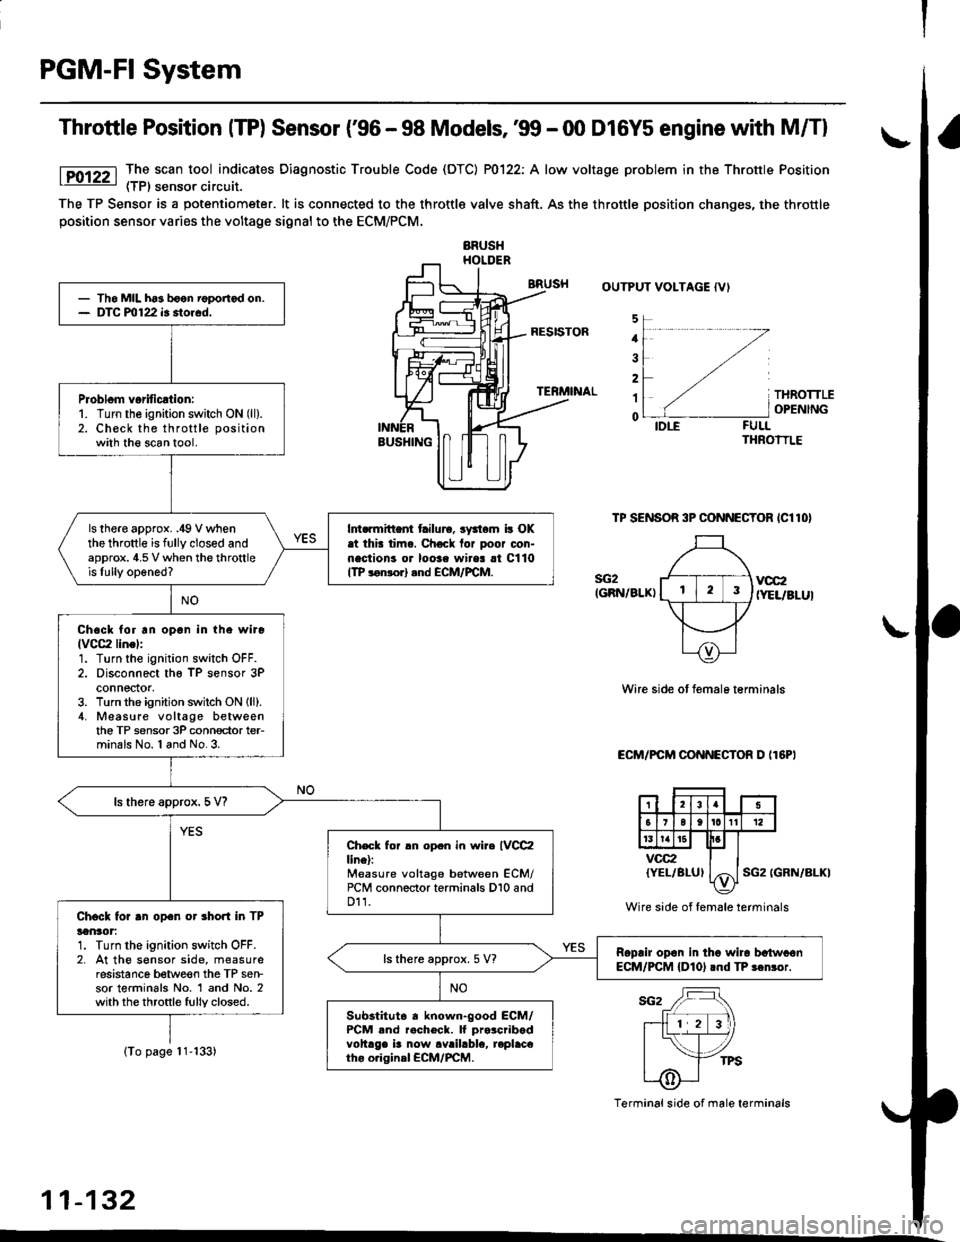 HONDA CIVIC 1998 6.G Workshop Manual PGM-FI System
Throttle Position ITP) Sensor (96 - 98 Models,99 - 00 D16Y5 engine with M/Tl
The scan tool indicates Diagnostic Trouble Code (DTC) P0122: A low voltage problem in the Throttle Position